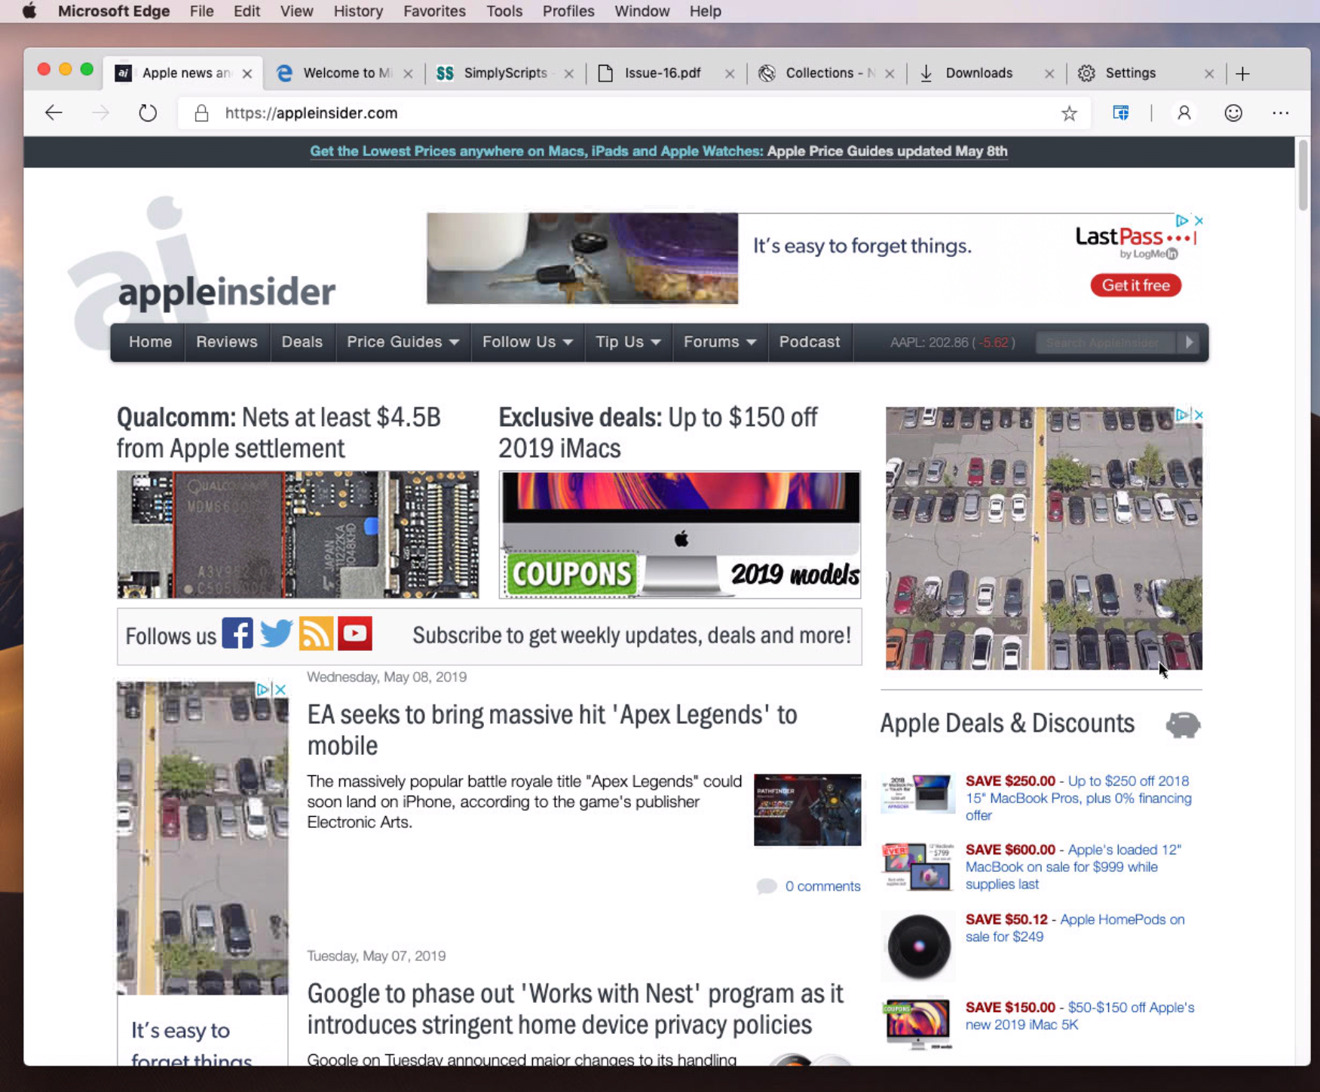 Microsoft Edge showing AppleInsider's front page.